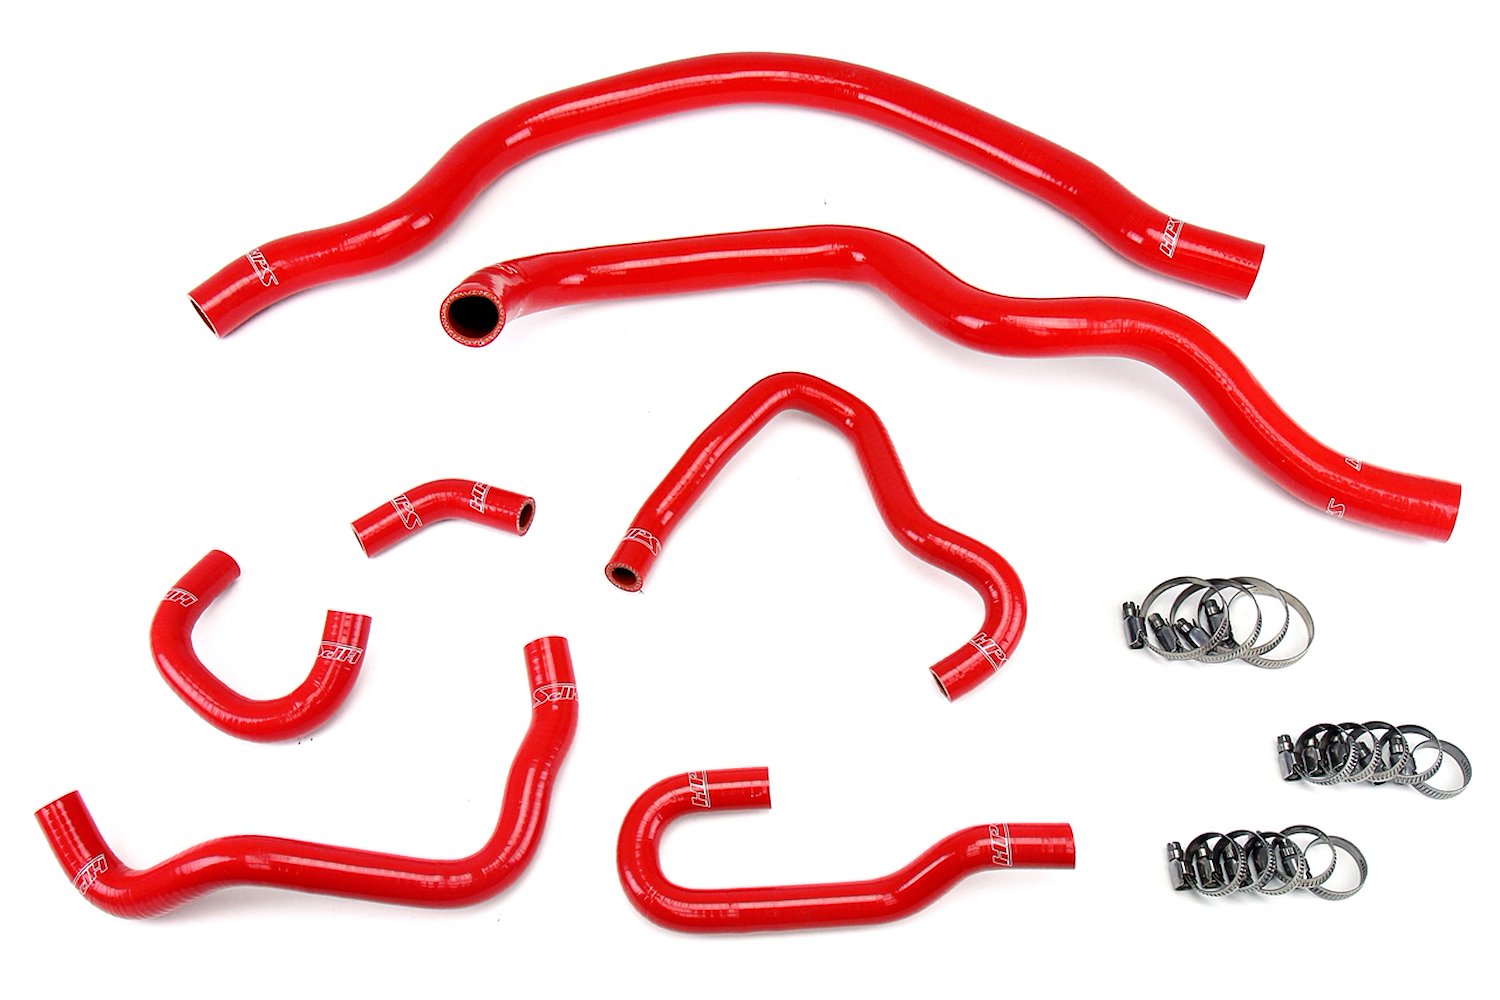 57-1489-RED Coolant Hose Kit, High-Temp 3-Ply Reinforced Silicone, Replace Rubber Radiator Heater Coolant Hoses